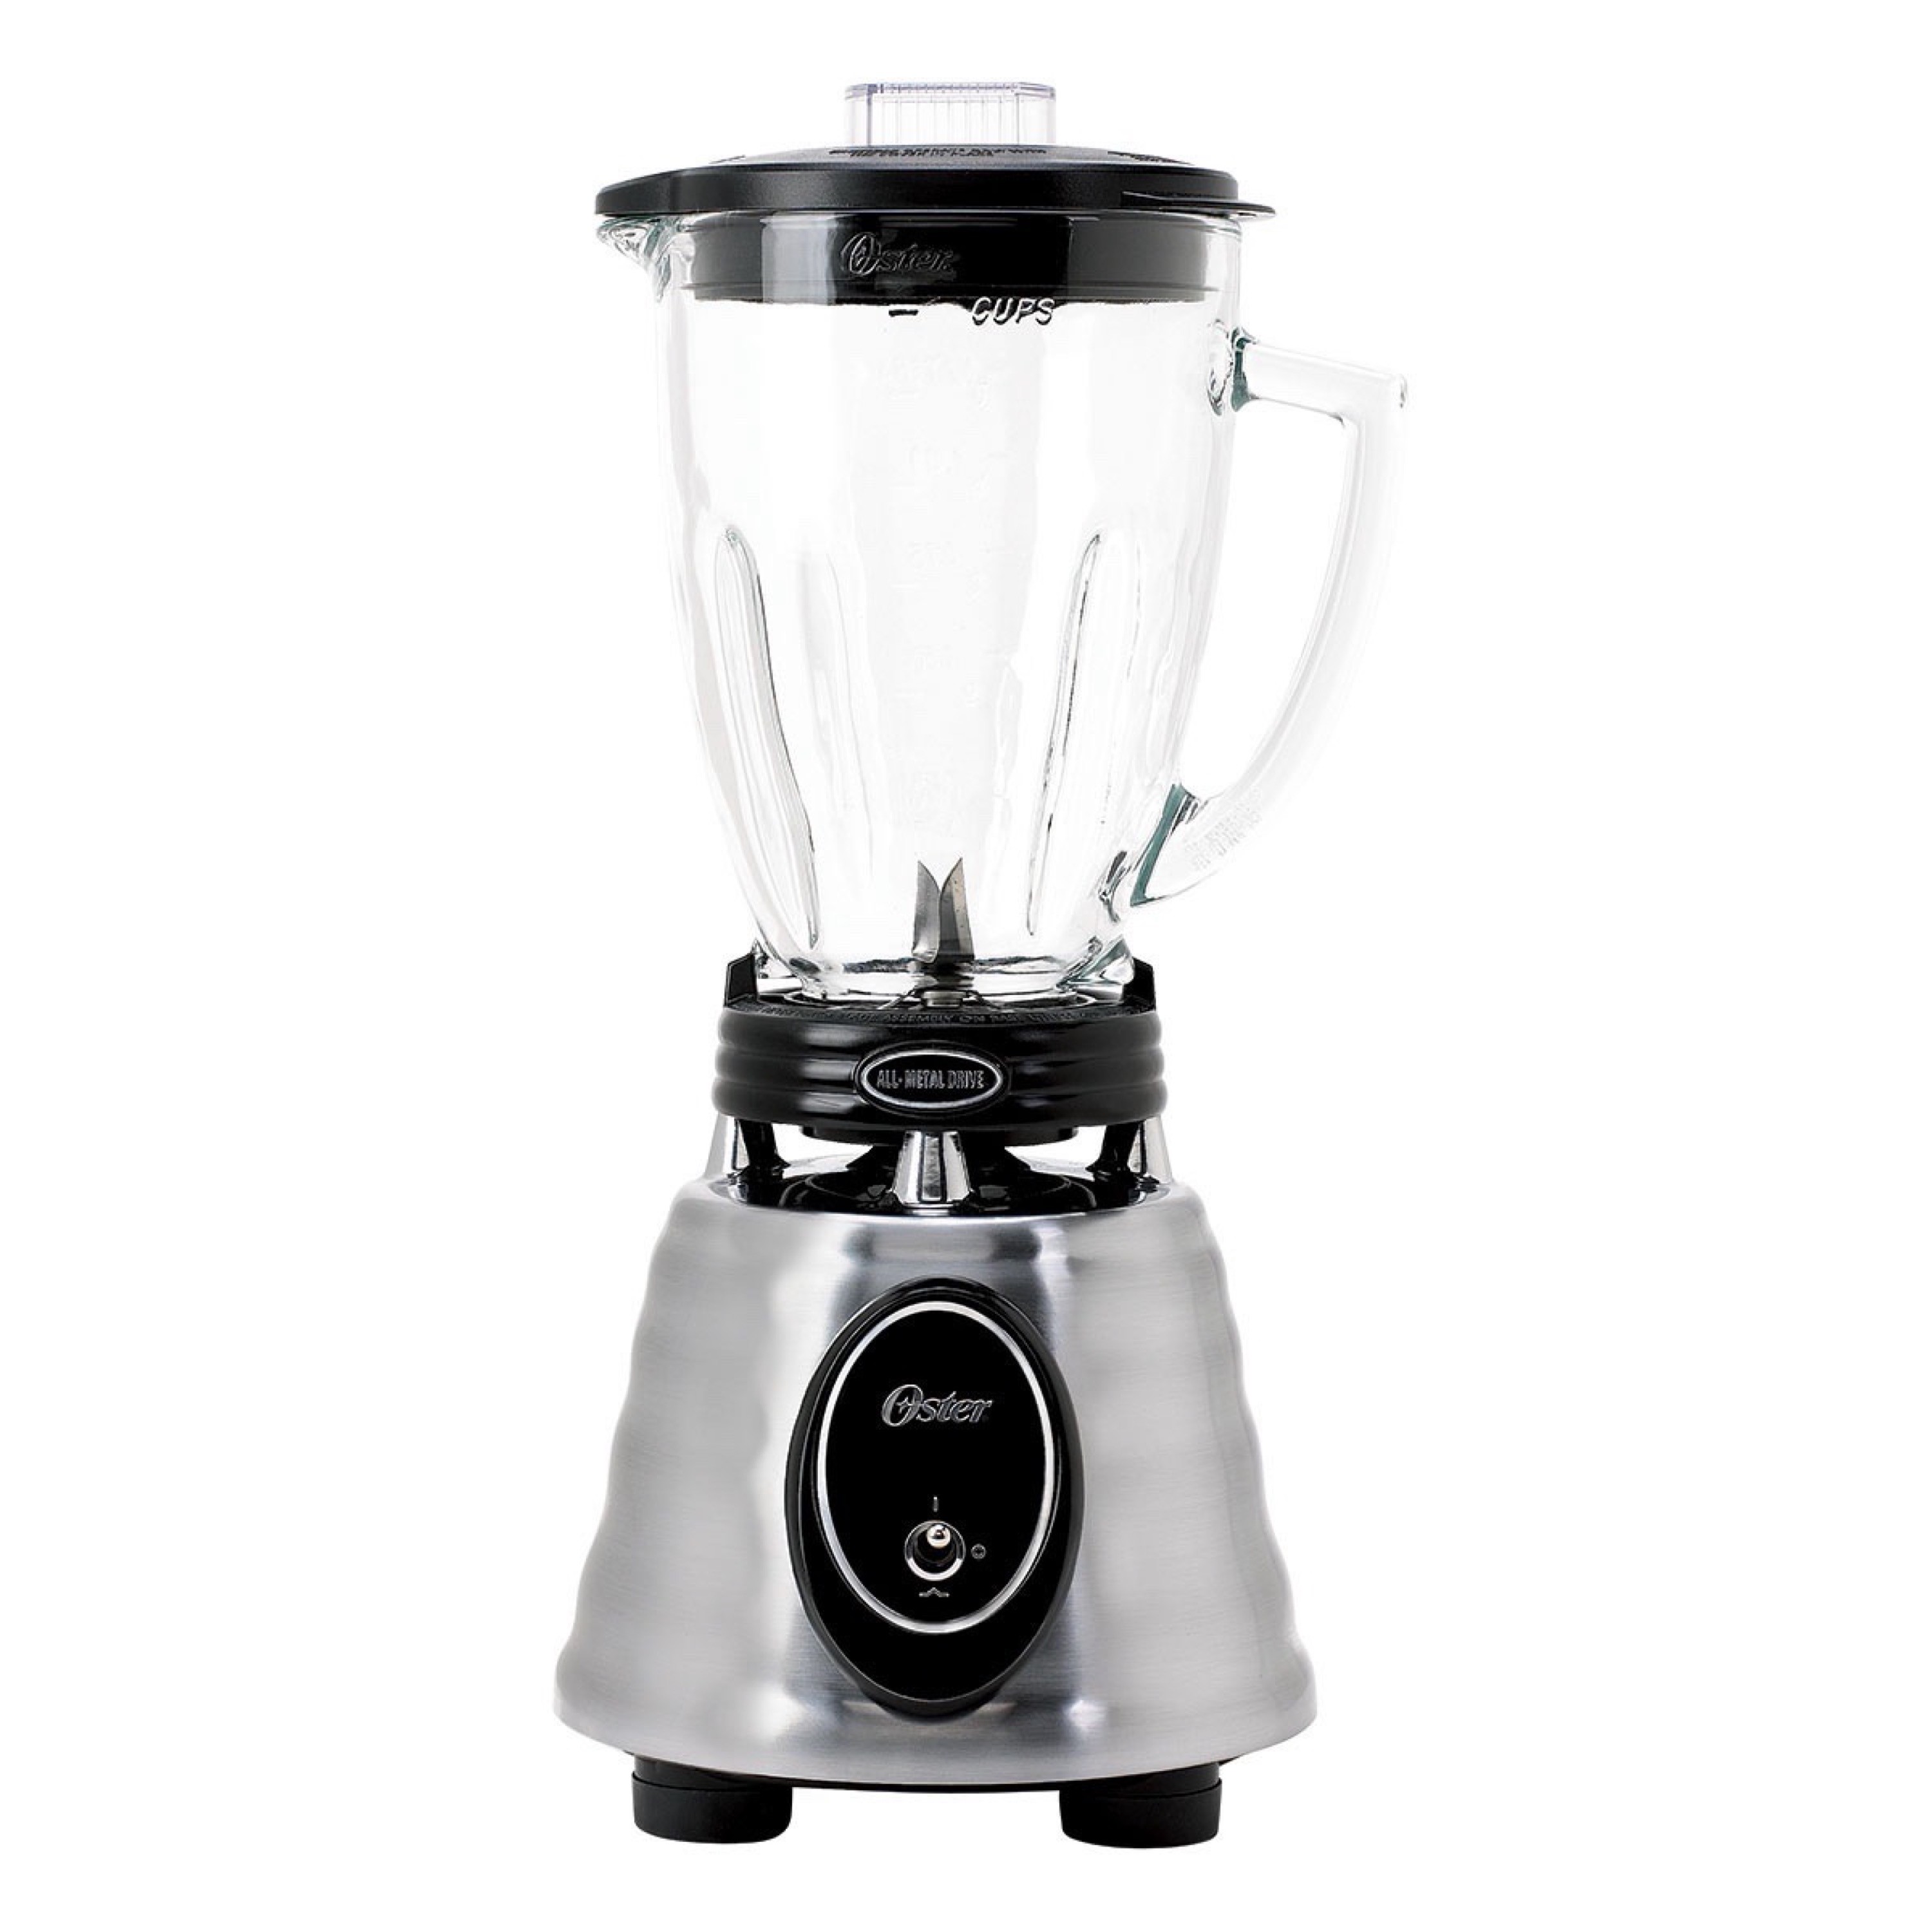 Oster® Classic Series Heritage Blender with 6-Cup Glass Jar, Stainless Steel - image 1 of 4